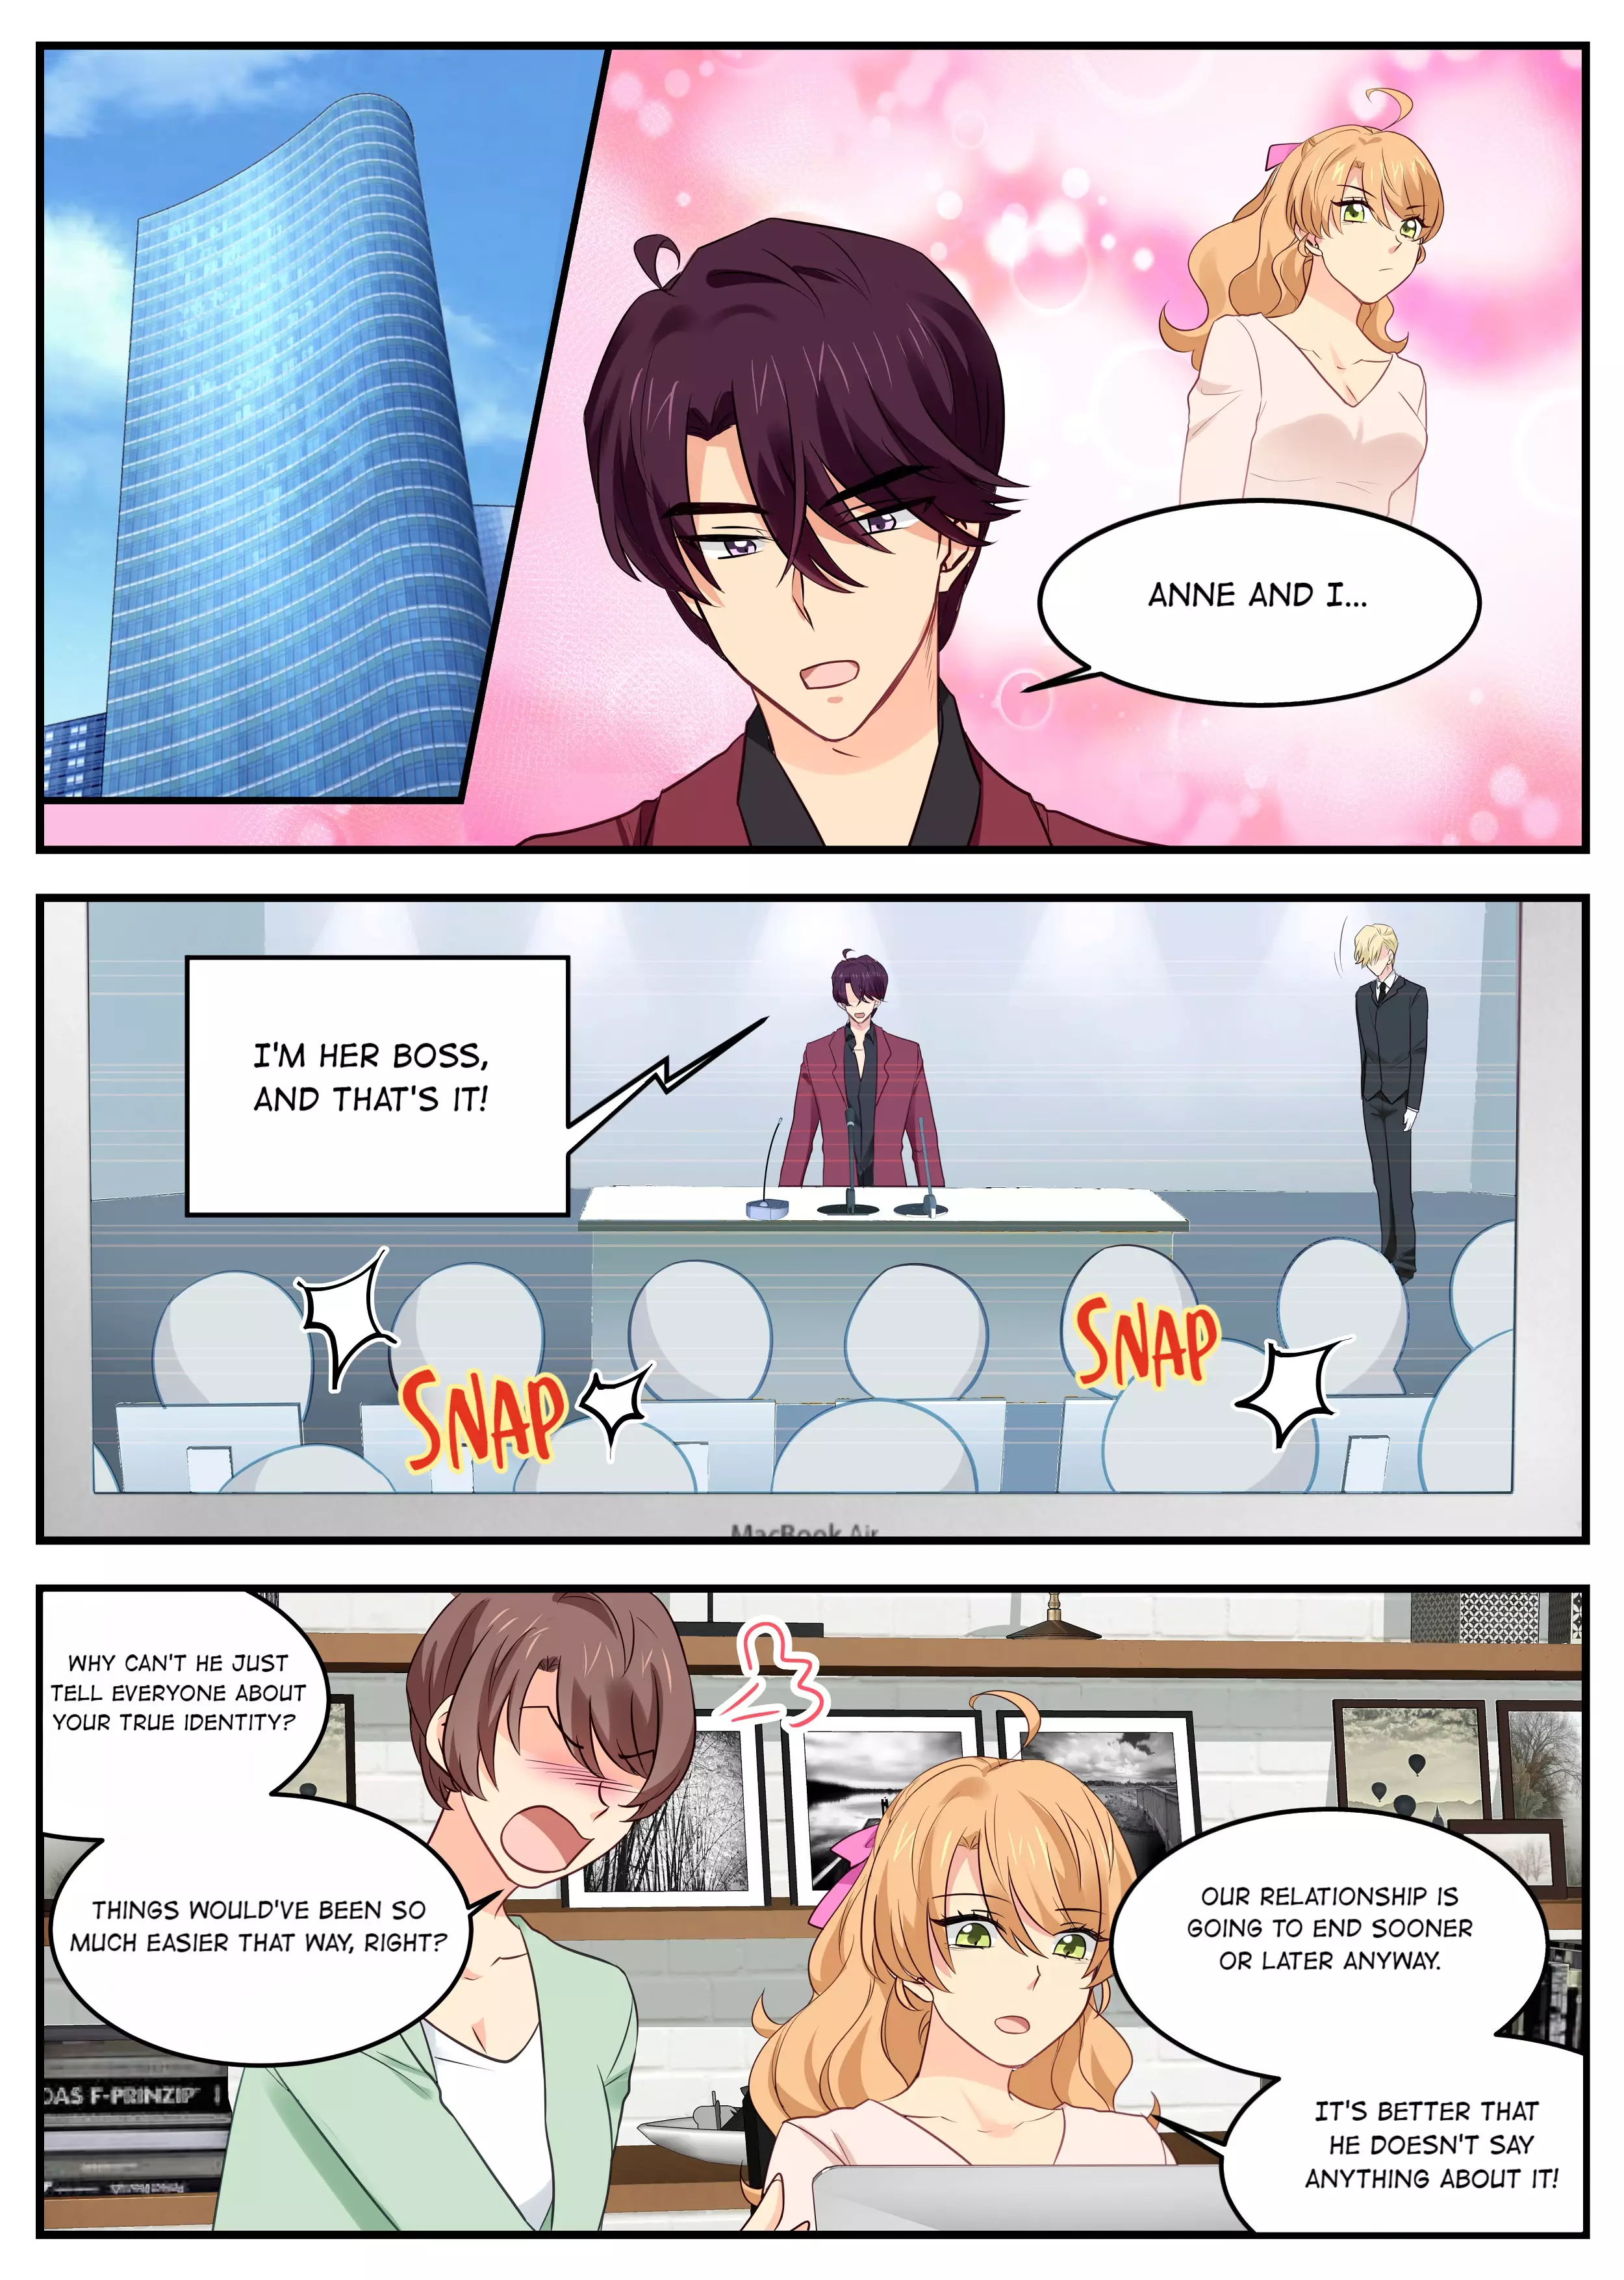 Married A Celebrity Manager - 47 page 1-3f6cb9a5